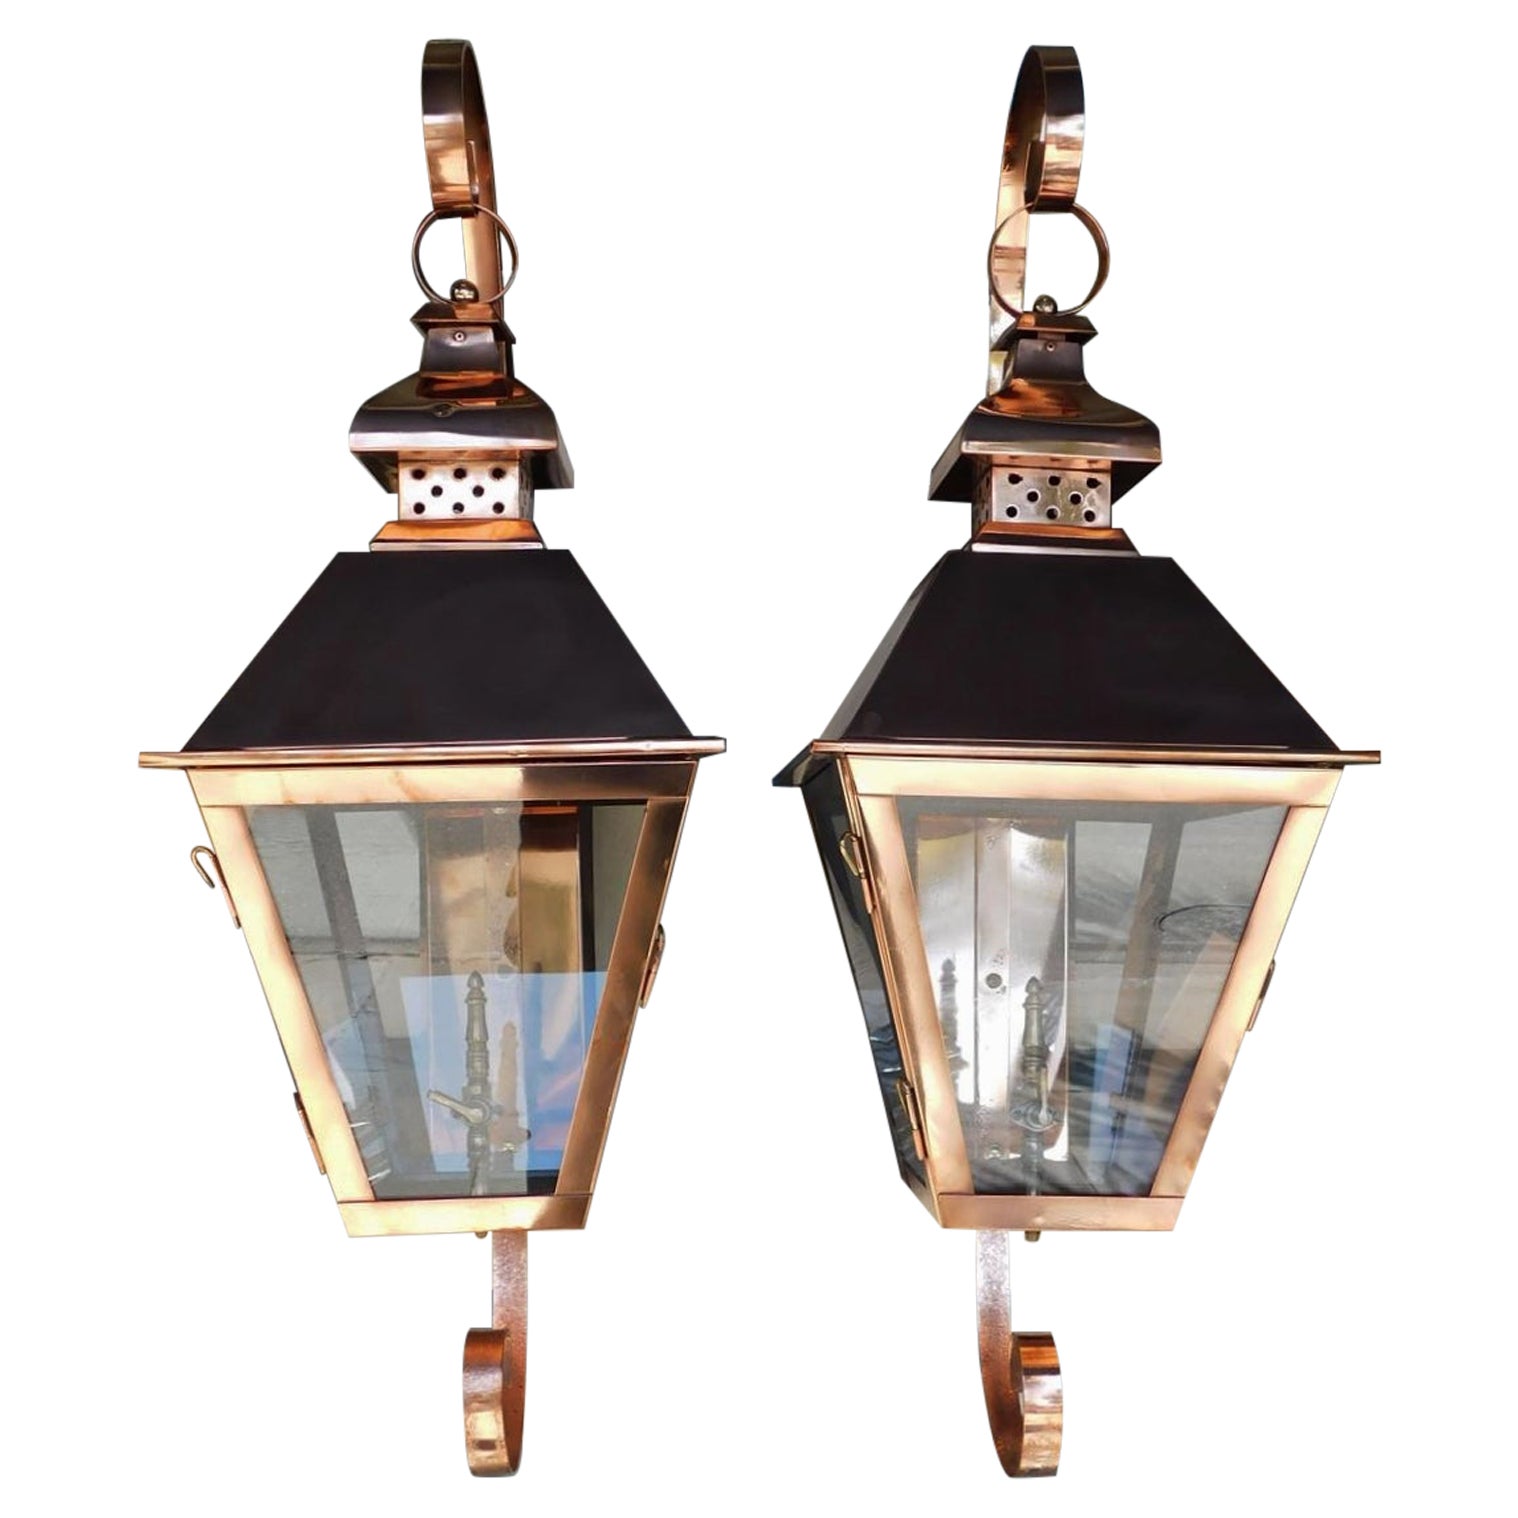 Pair of American Copper Gas Wall Lanterns with Flanking Scrolled Brackets 20th C